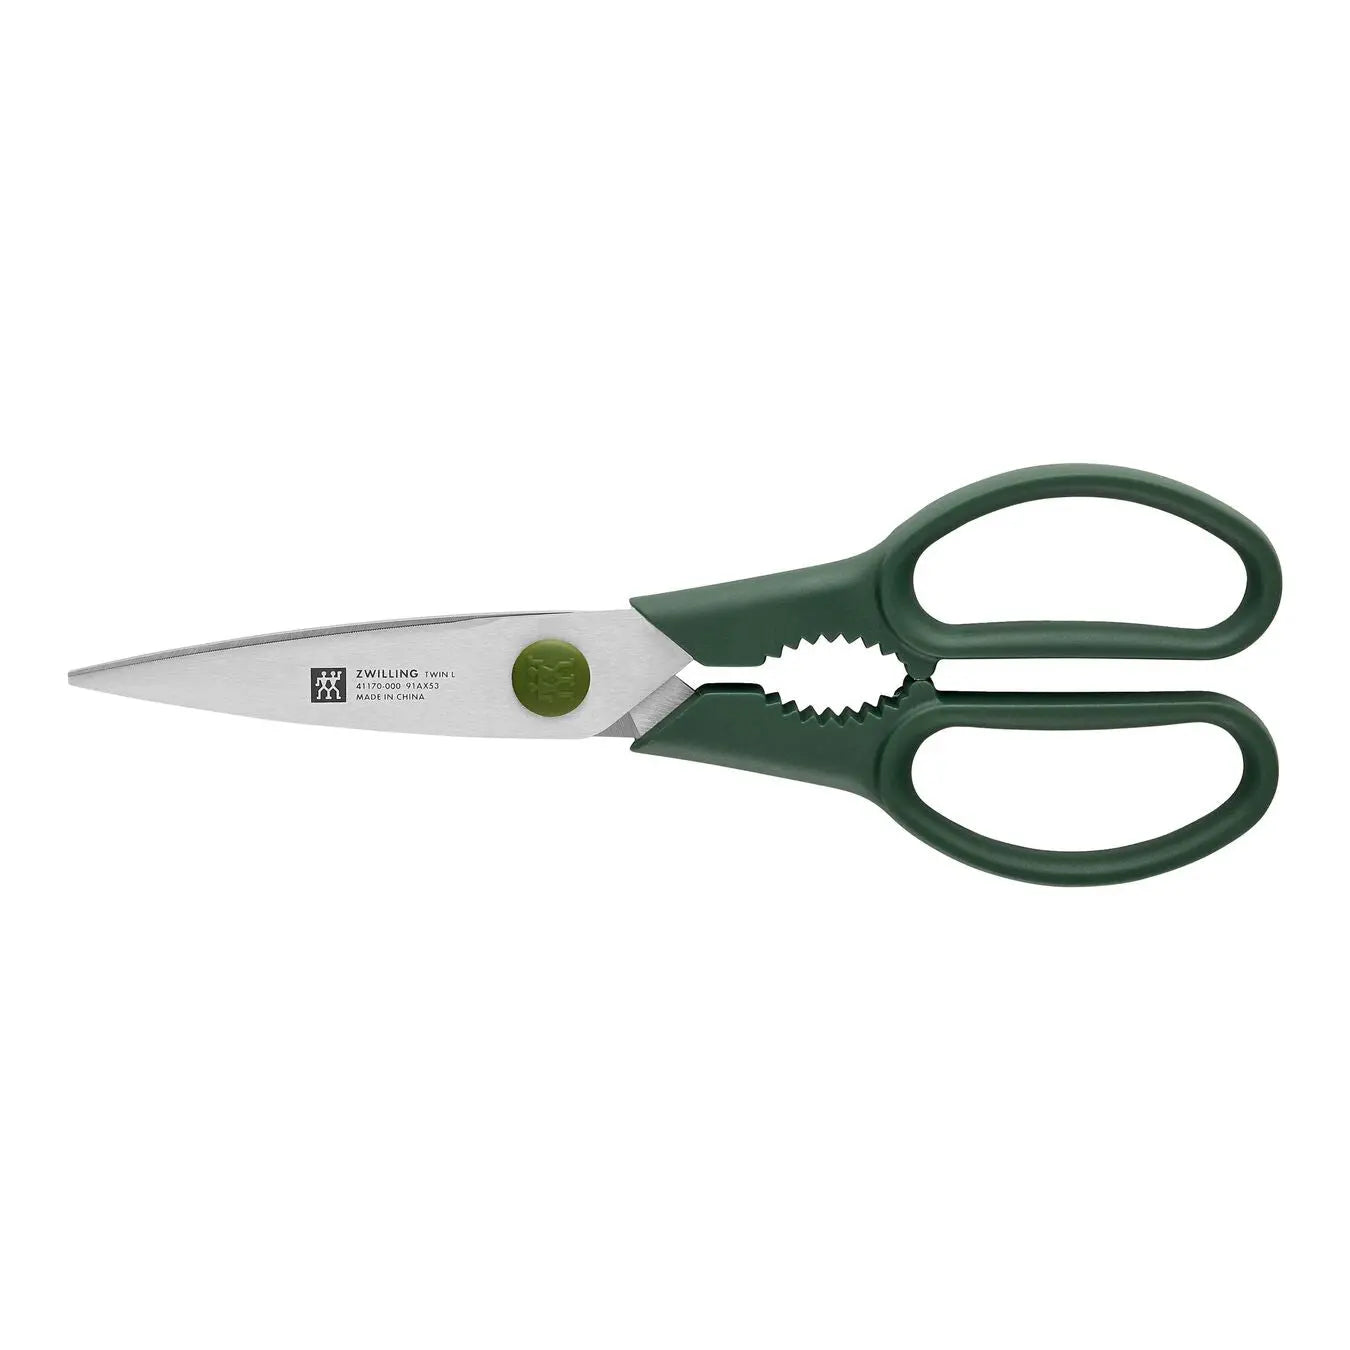 ZWILLING Now S Multi-Purpose Shears ZWILLING